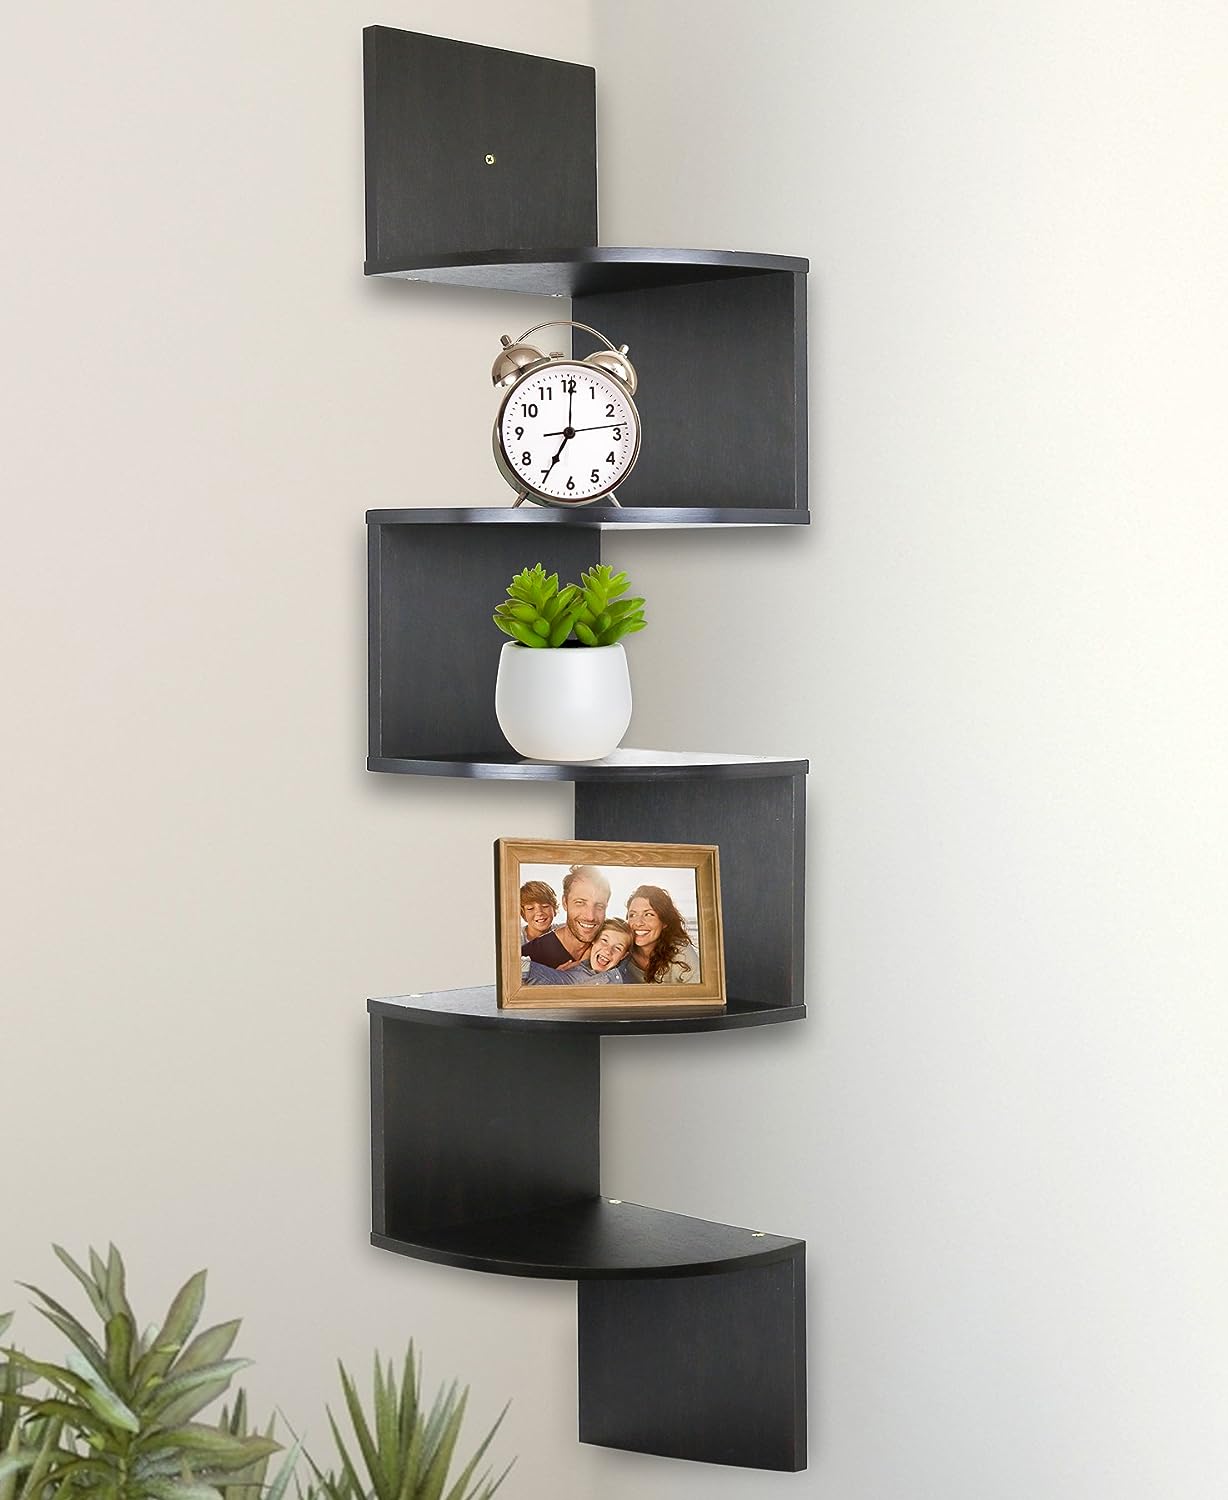 Floating Wall Mount Shelves for Bedrooms and Living Rooms - Wall Decor, Bedroom Decor, Home Office